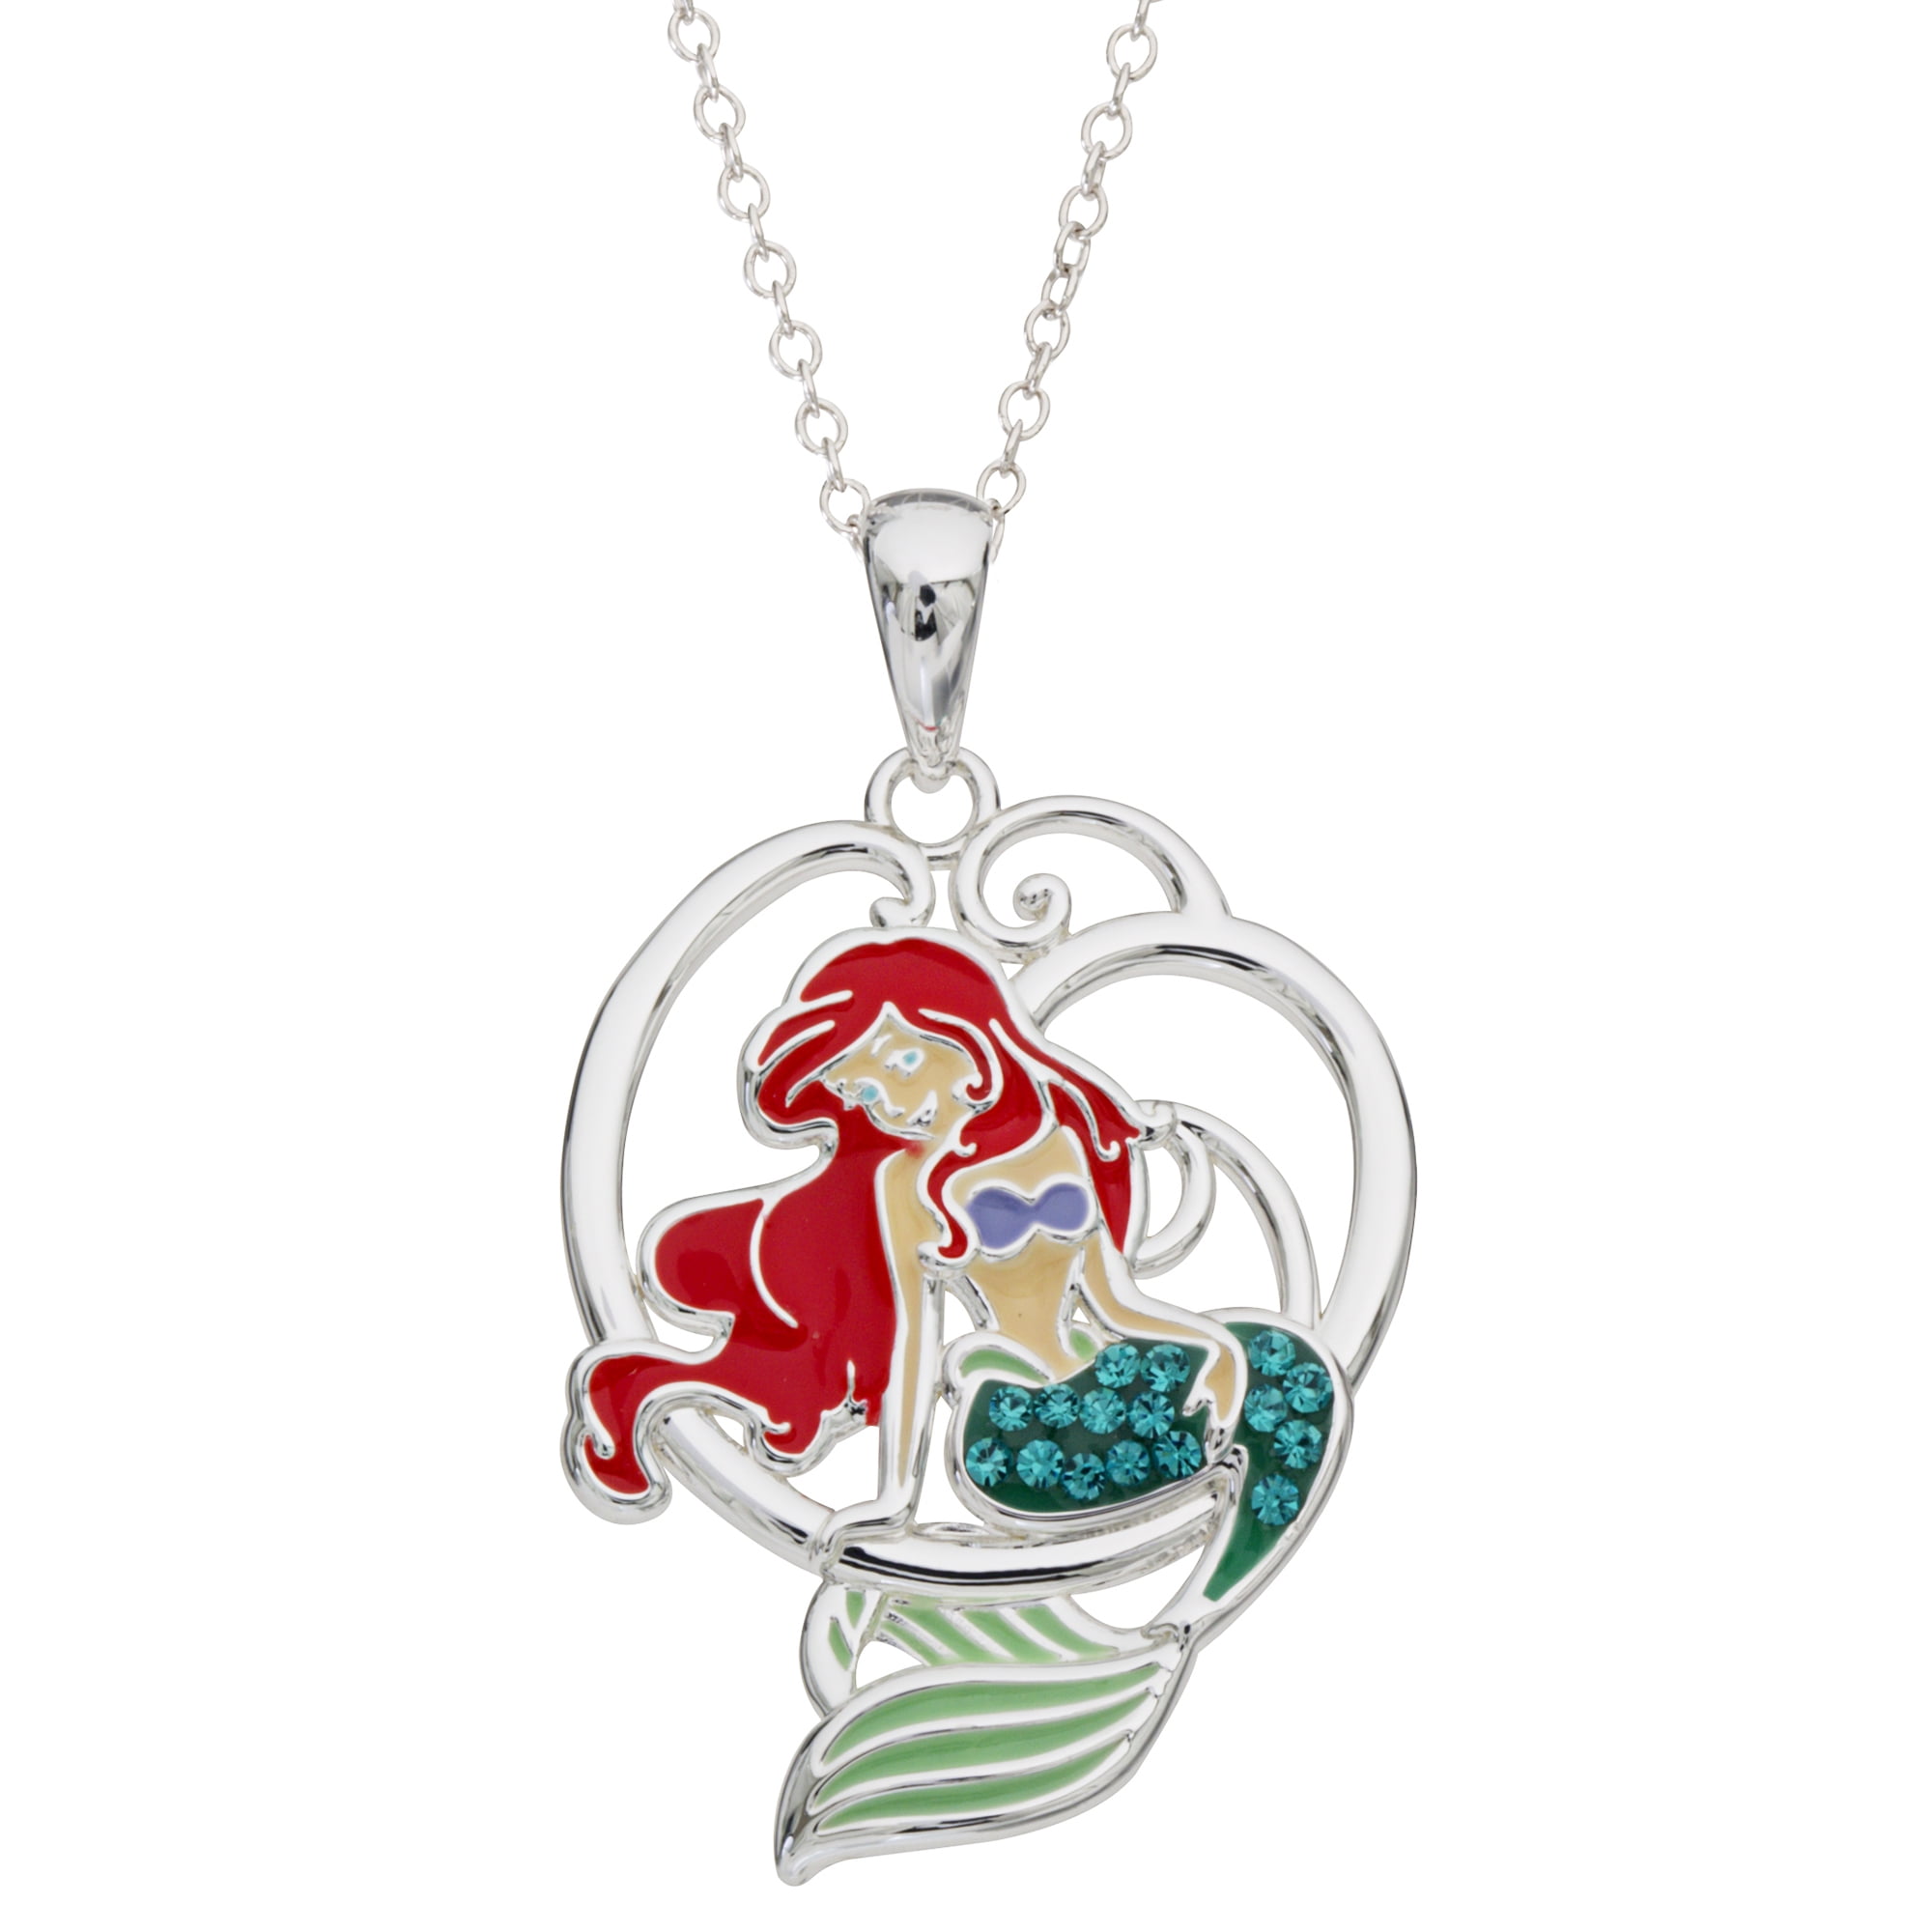 PRINCESS LITTLE  MERMAID ARIEL NECKLACE STRONG 16 INCH  GIFT BOX PARTY BIRTHDAY 